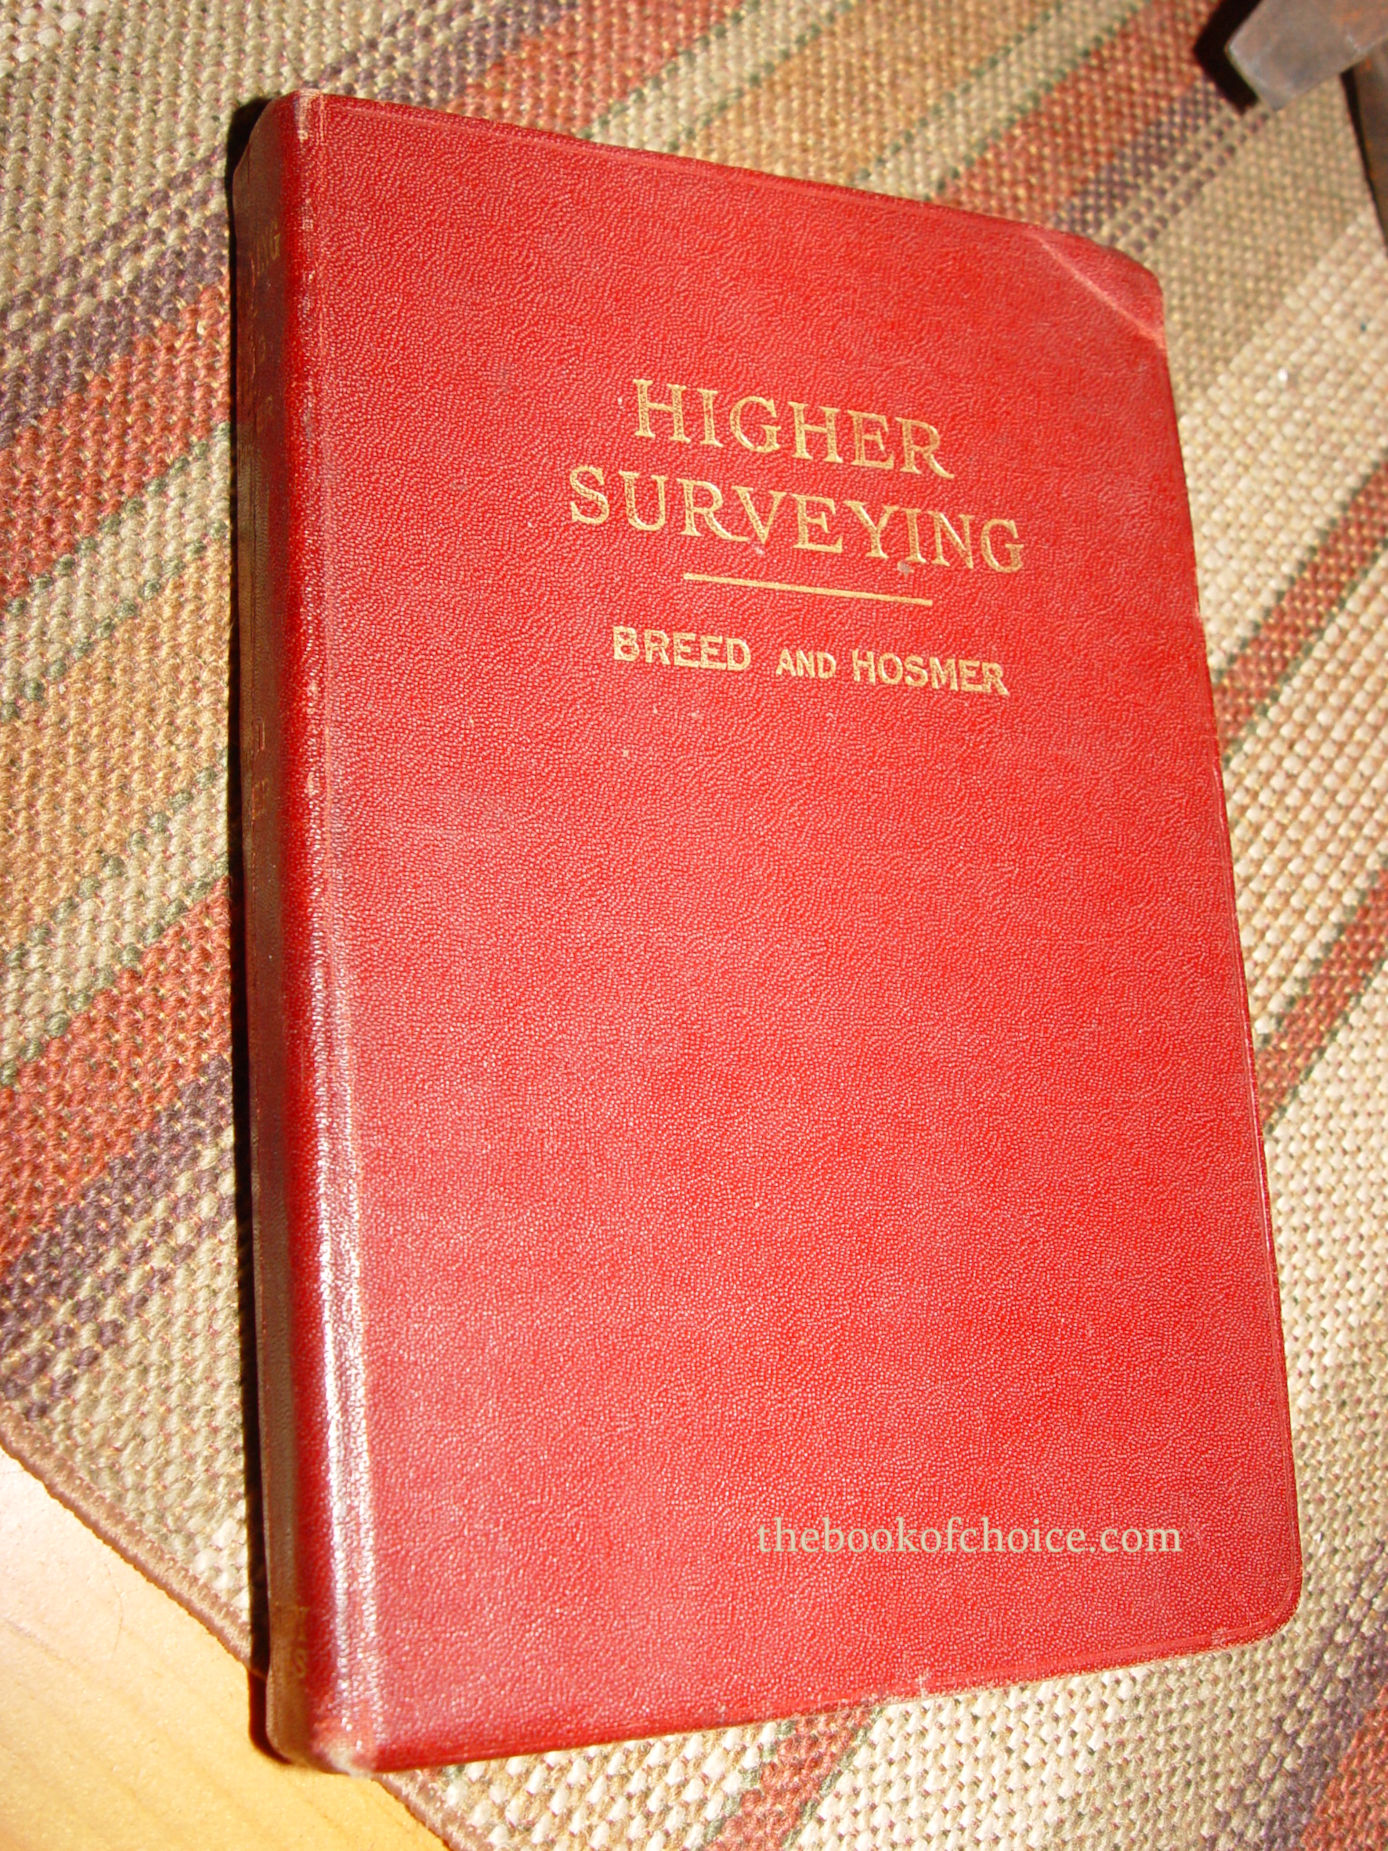 Higher Surveying Volume II 1928 3rd Edition
                        by Breed and Hosmer